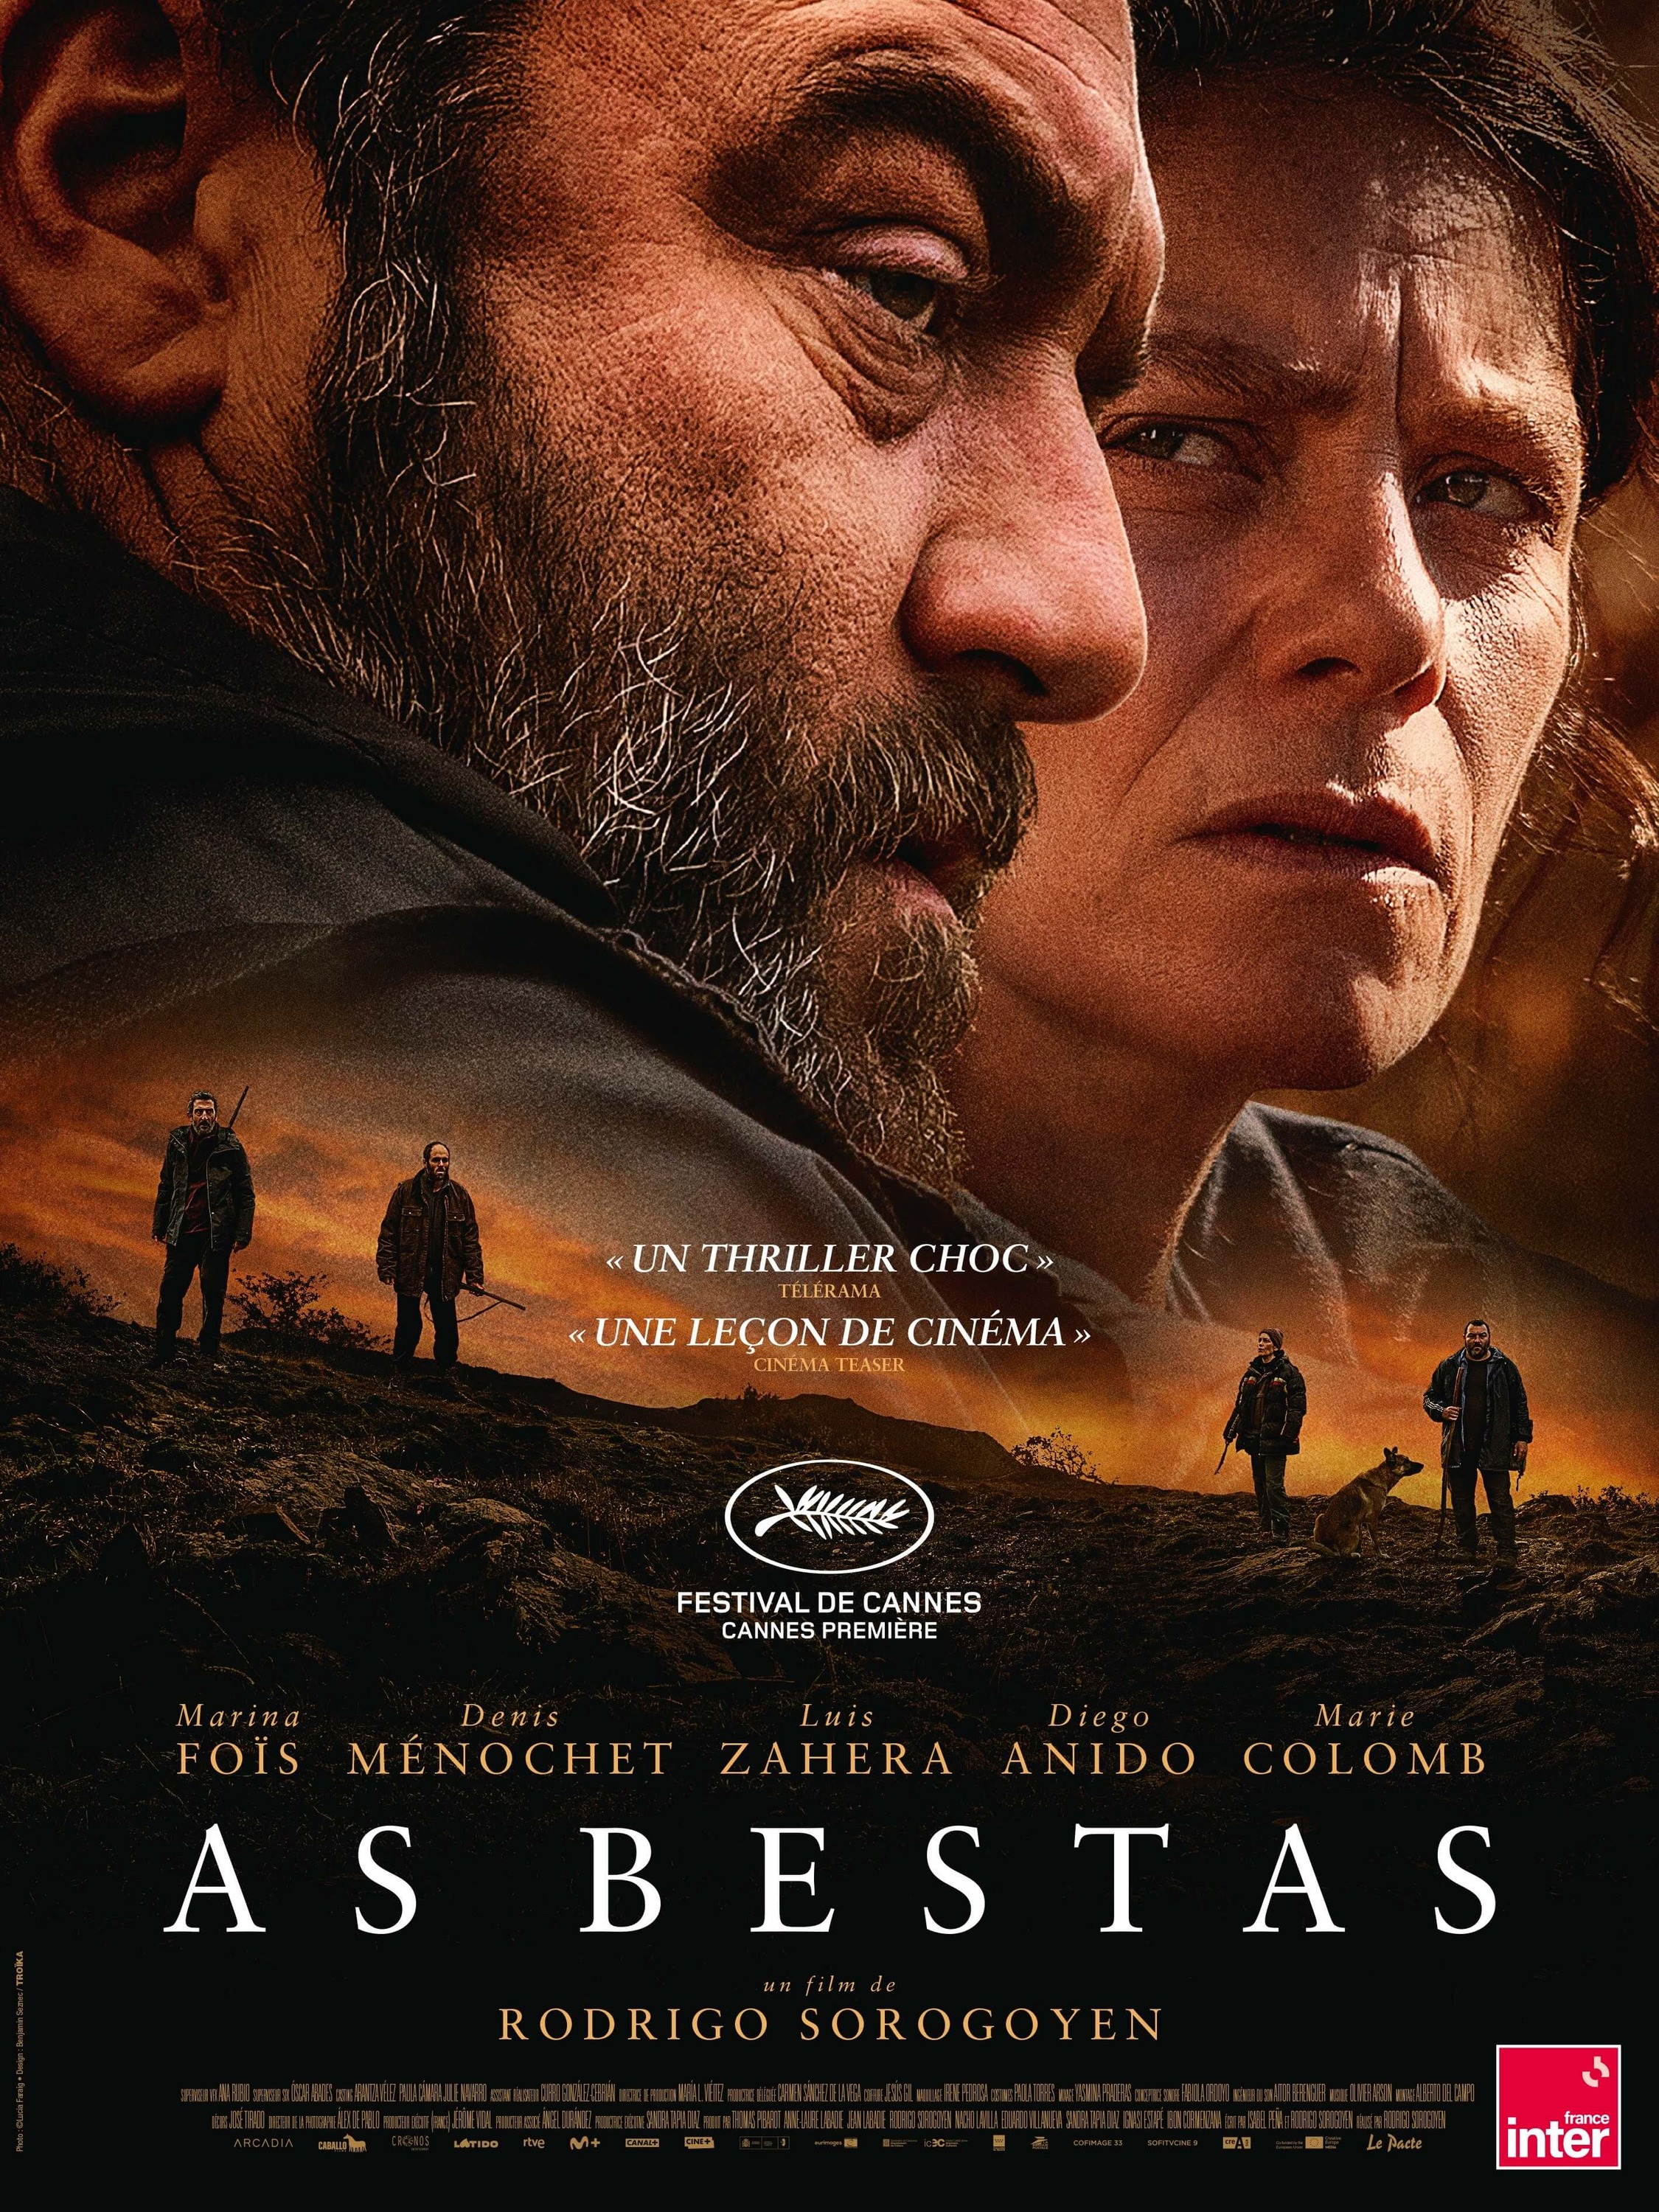 Mega Sized Movie Poster Image for As bestas (#3 of 3)